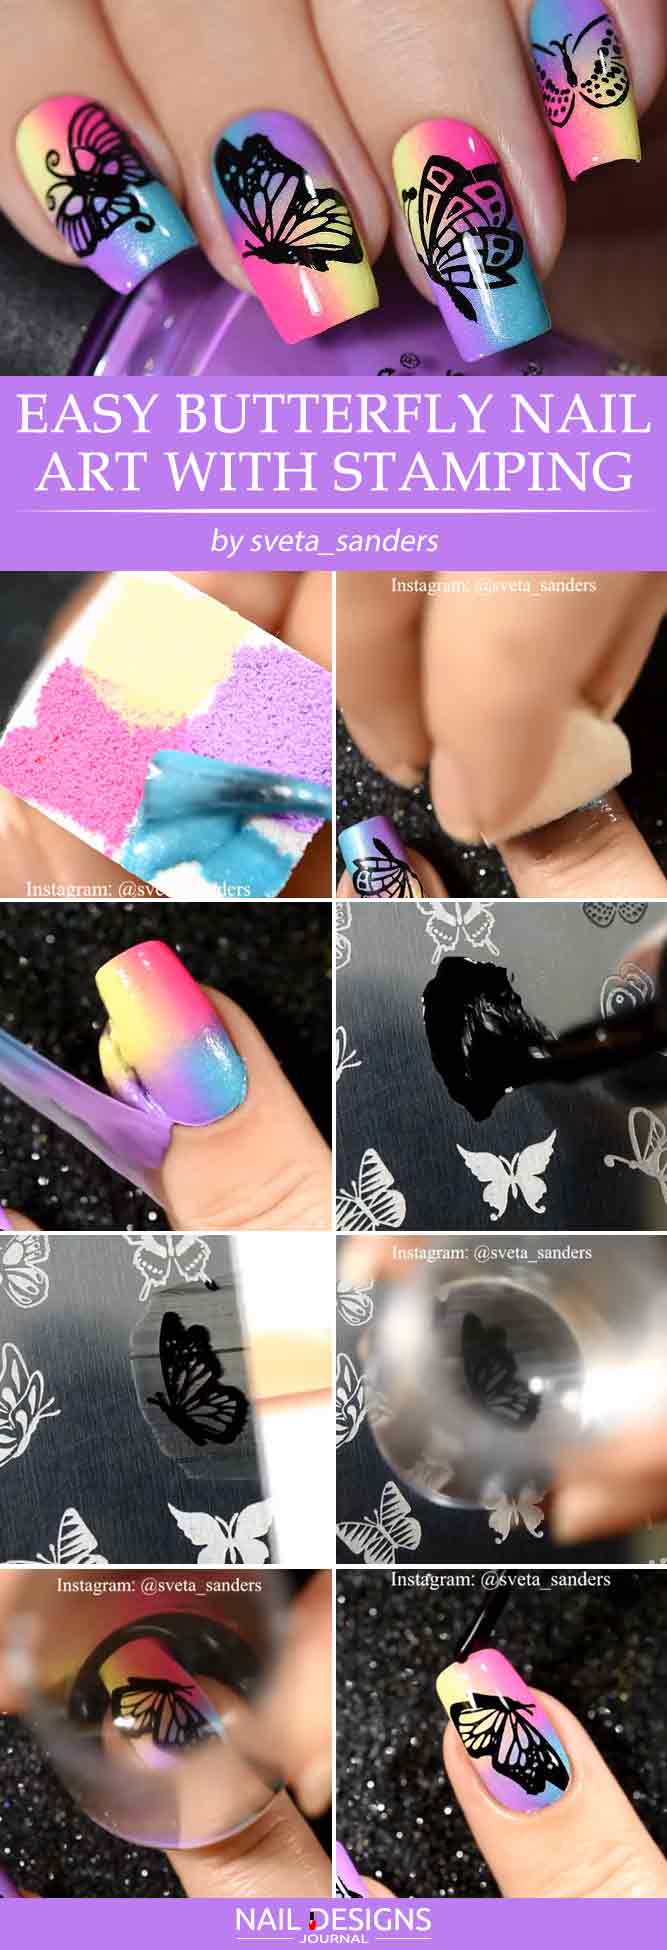 Easy Butterfly Nail Art With Stamping #nailstamping #ombrenails #squarenails